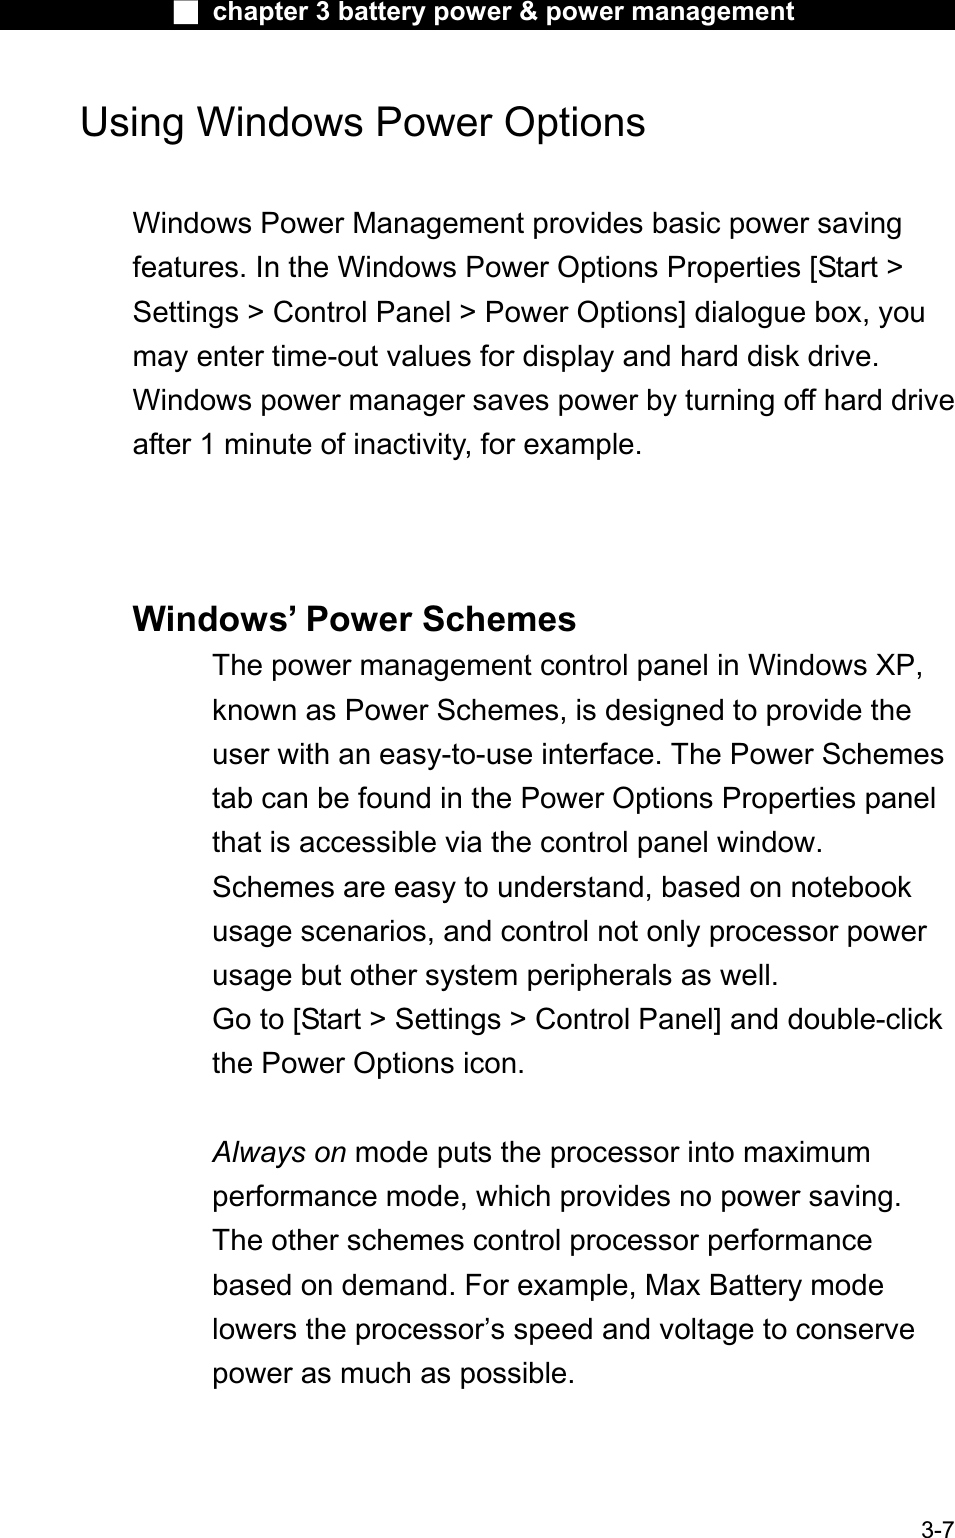 Ϯ chapter 3 battery power &amp; power managementUsing Windows Power OptionsWindows Power Management provides basic power saving features. In the Windows Power Options Properties [Start &gt; Settings &gt; Control Panel &gt; Power Options] dialogue box, you may enter time-out values for display and hard disk drive. Windows power manager saves power by turning off hard driveafter 1 minute of inactivity, for example.Windows’ Power Schemes The power management control panel in Windows XP, known as Power Schemes, is designed to provide theuser with an easy-to-use interface. The Power Schemestab can be found in the Power Options Properties panelthat is accessible via the control panel window.Schemes are easy to understand, based on notebookusage scenarios, and control not only processor powerusage but other system peripherals as well. Go to [Start &gt; Settings &gt; Control Panel] and double-clickthe Power Options icon. Always on mode puts the processor into maximum performance mode, which provides no power saving.The other schemes control processor performancebased on demand. For example, Max Battery mode lowers the processor’s speed and voltage to conservepower as much as possible.3-7